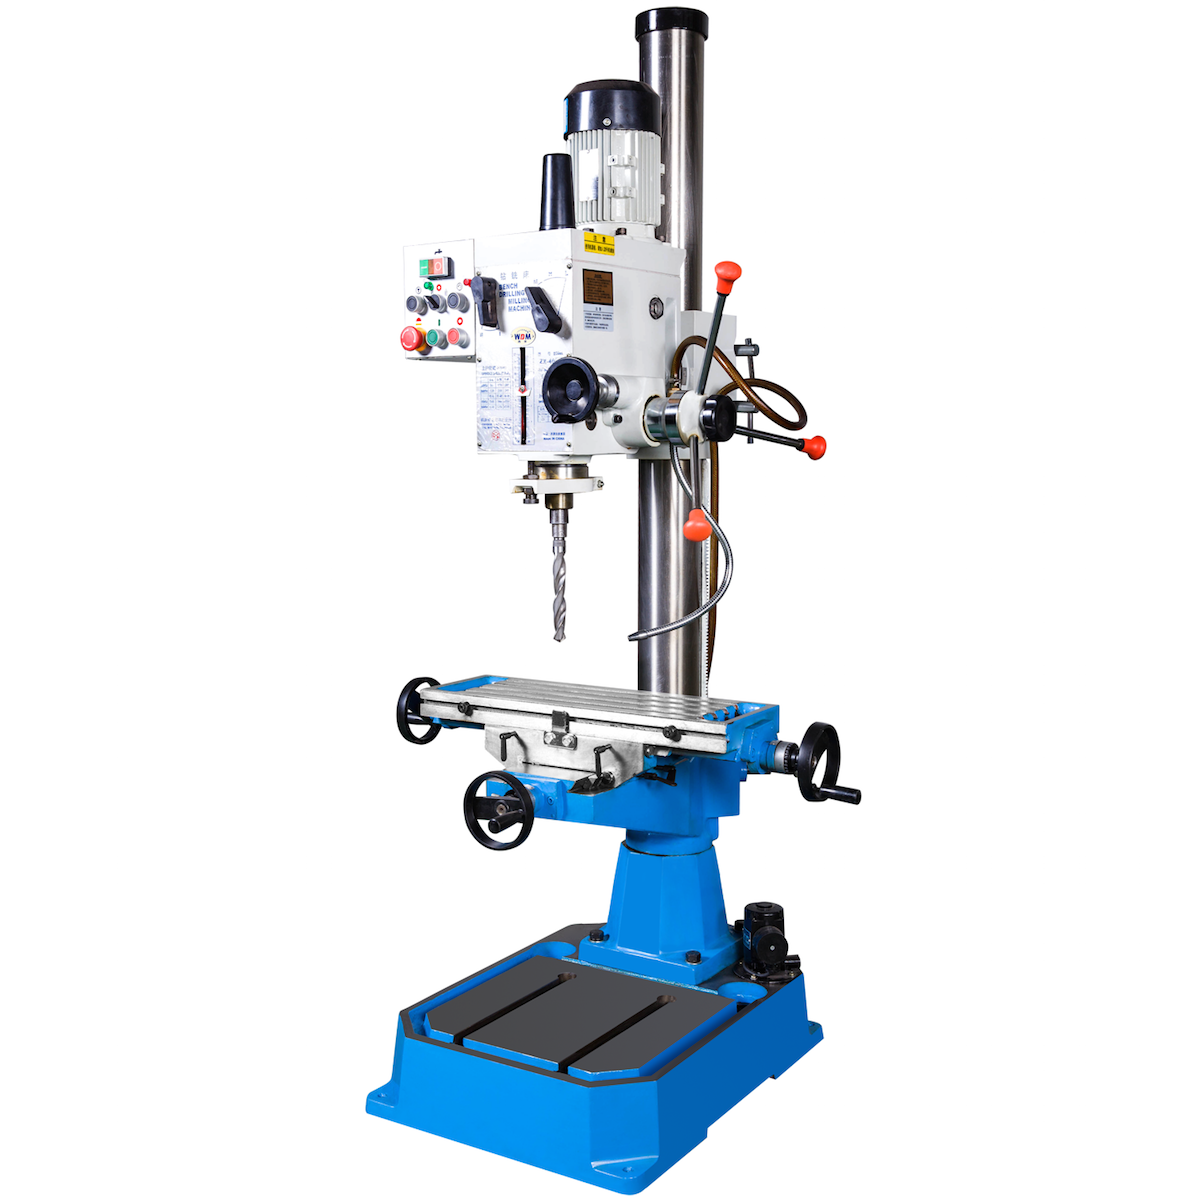 Xest Ling Drilling & Milling Machine 40mm,750W ZX-40PC - Click Image to Close